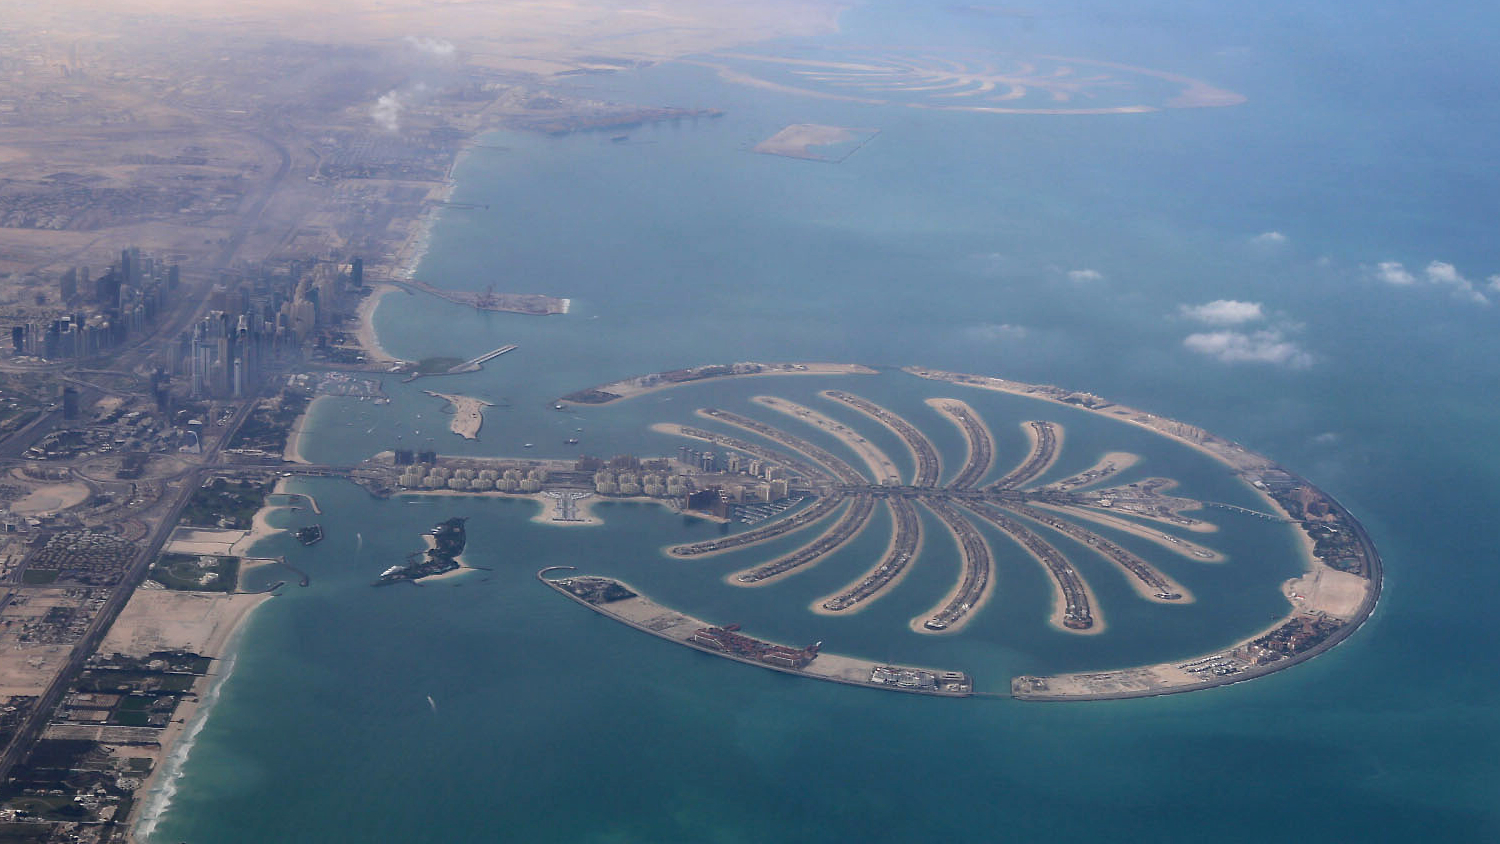 09_Dubai_Palm_Islands_from_the_air_WikimediaCommons